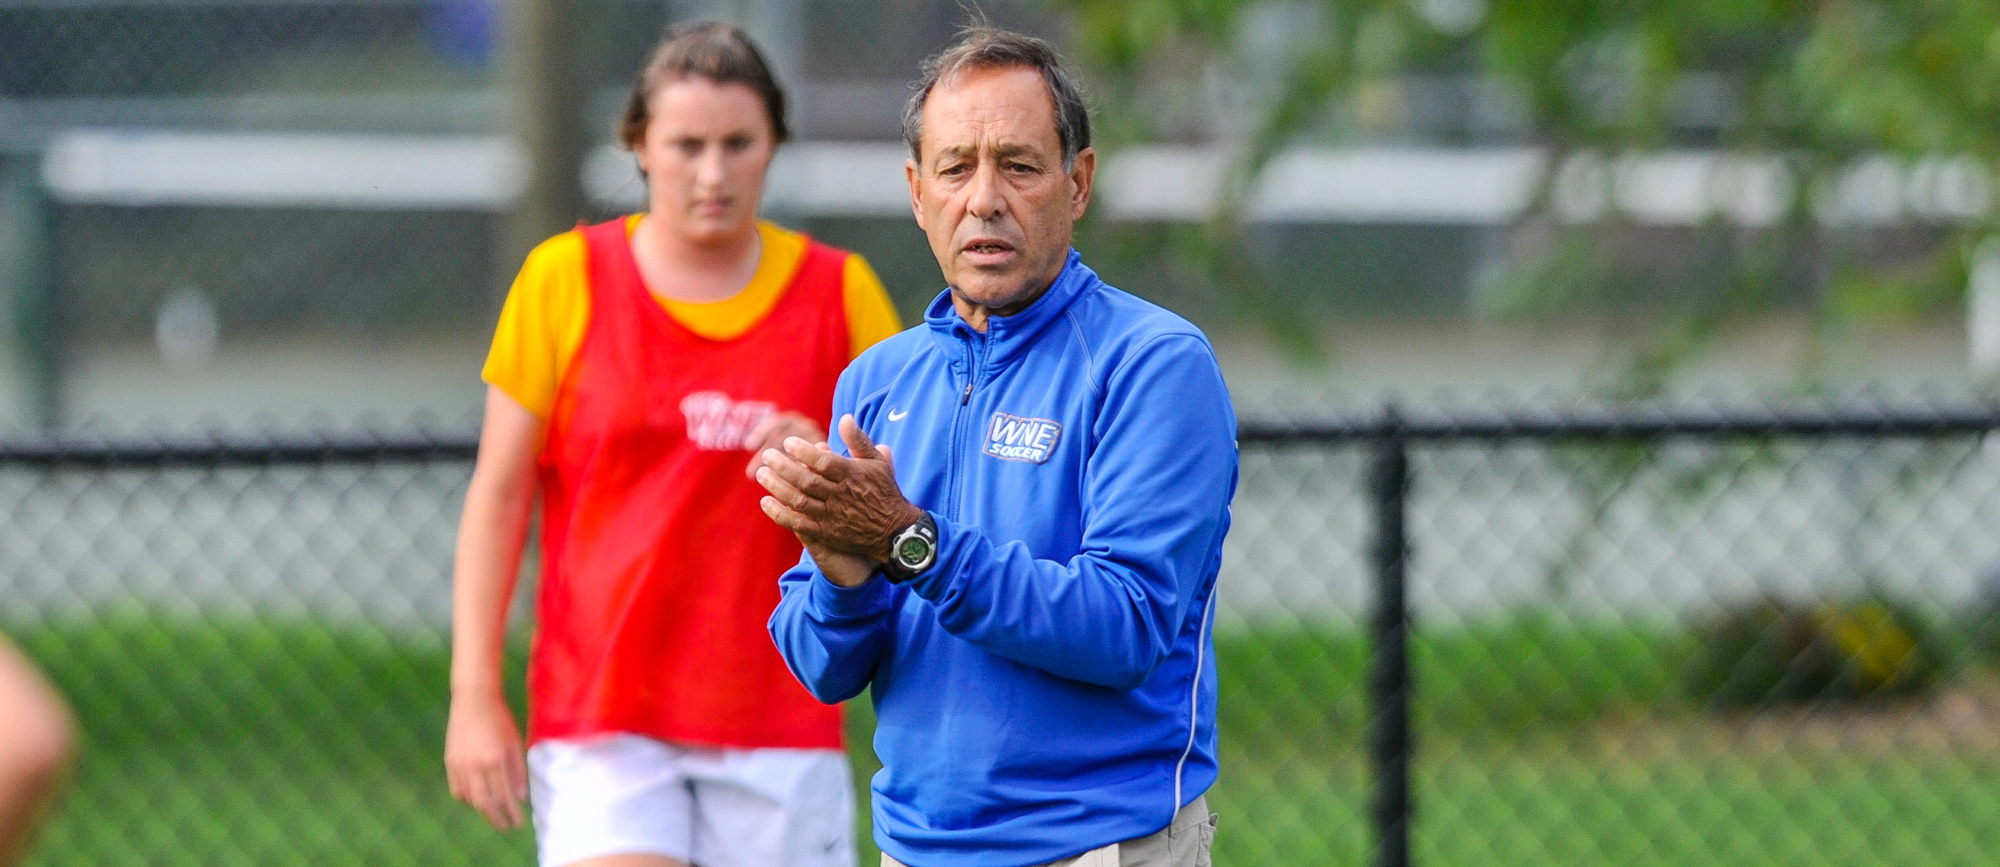 Ron Dias Retiring After 22 Seasons as Head Women’s Soccer Coach at Western New England